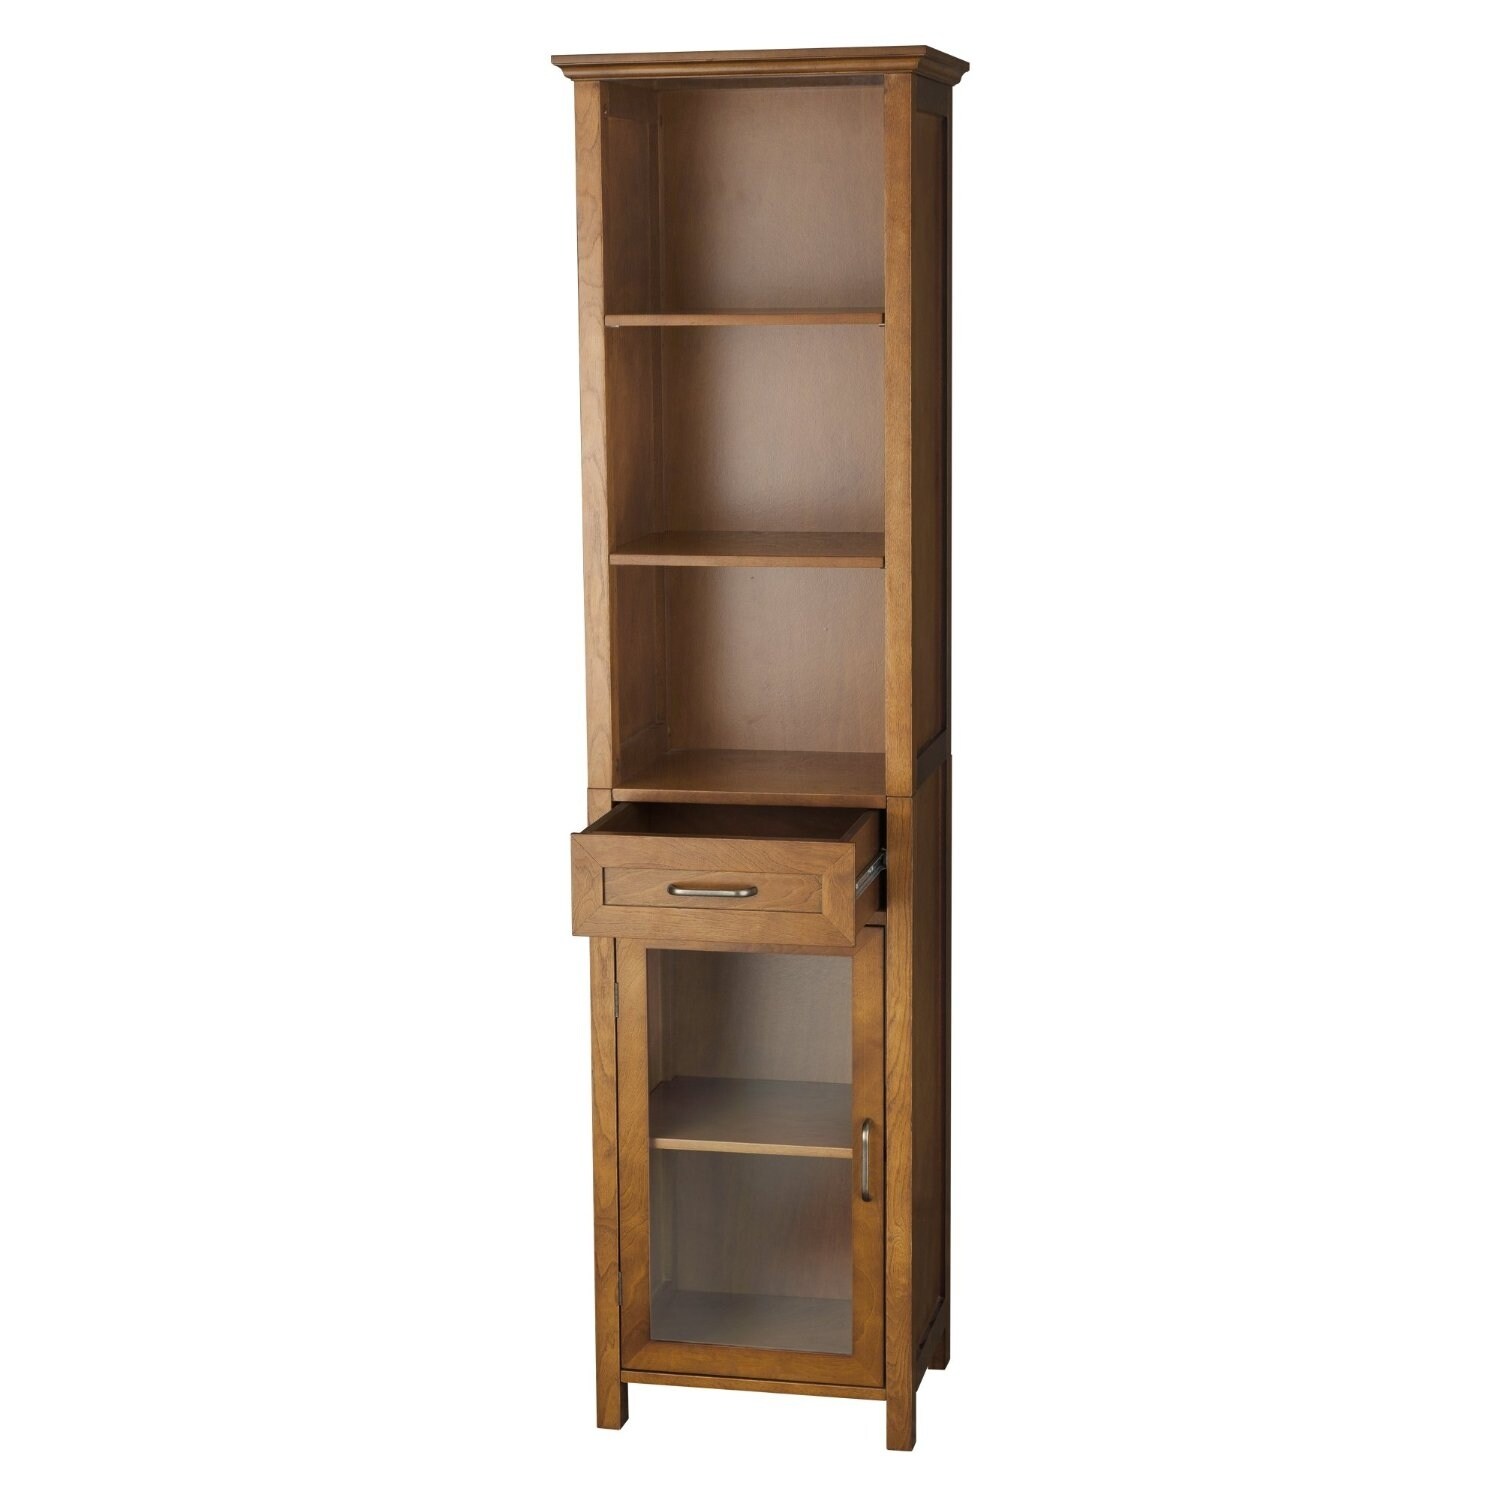 https://ak1.ostkcdn.com/images/products/is/images/direct/697b93f9069ac43dd4933ebe8da25d3f8a320549/Oak-Finish-Bathroom-Linen-Tower-Storage-Cabinet-with-Shelves.jpg